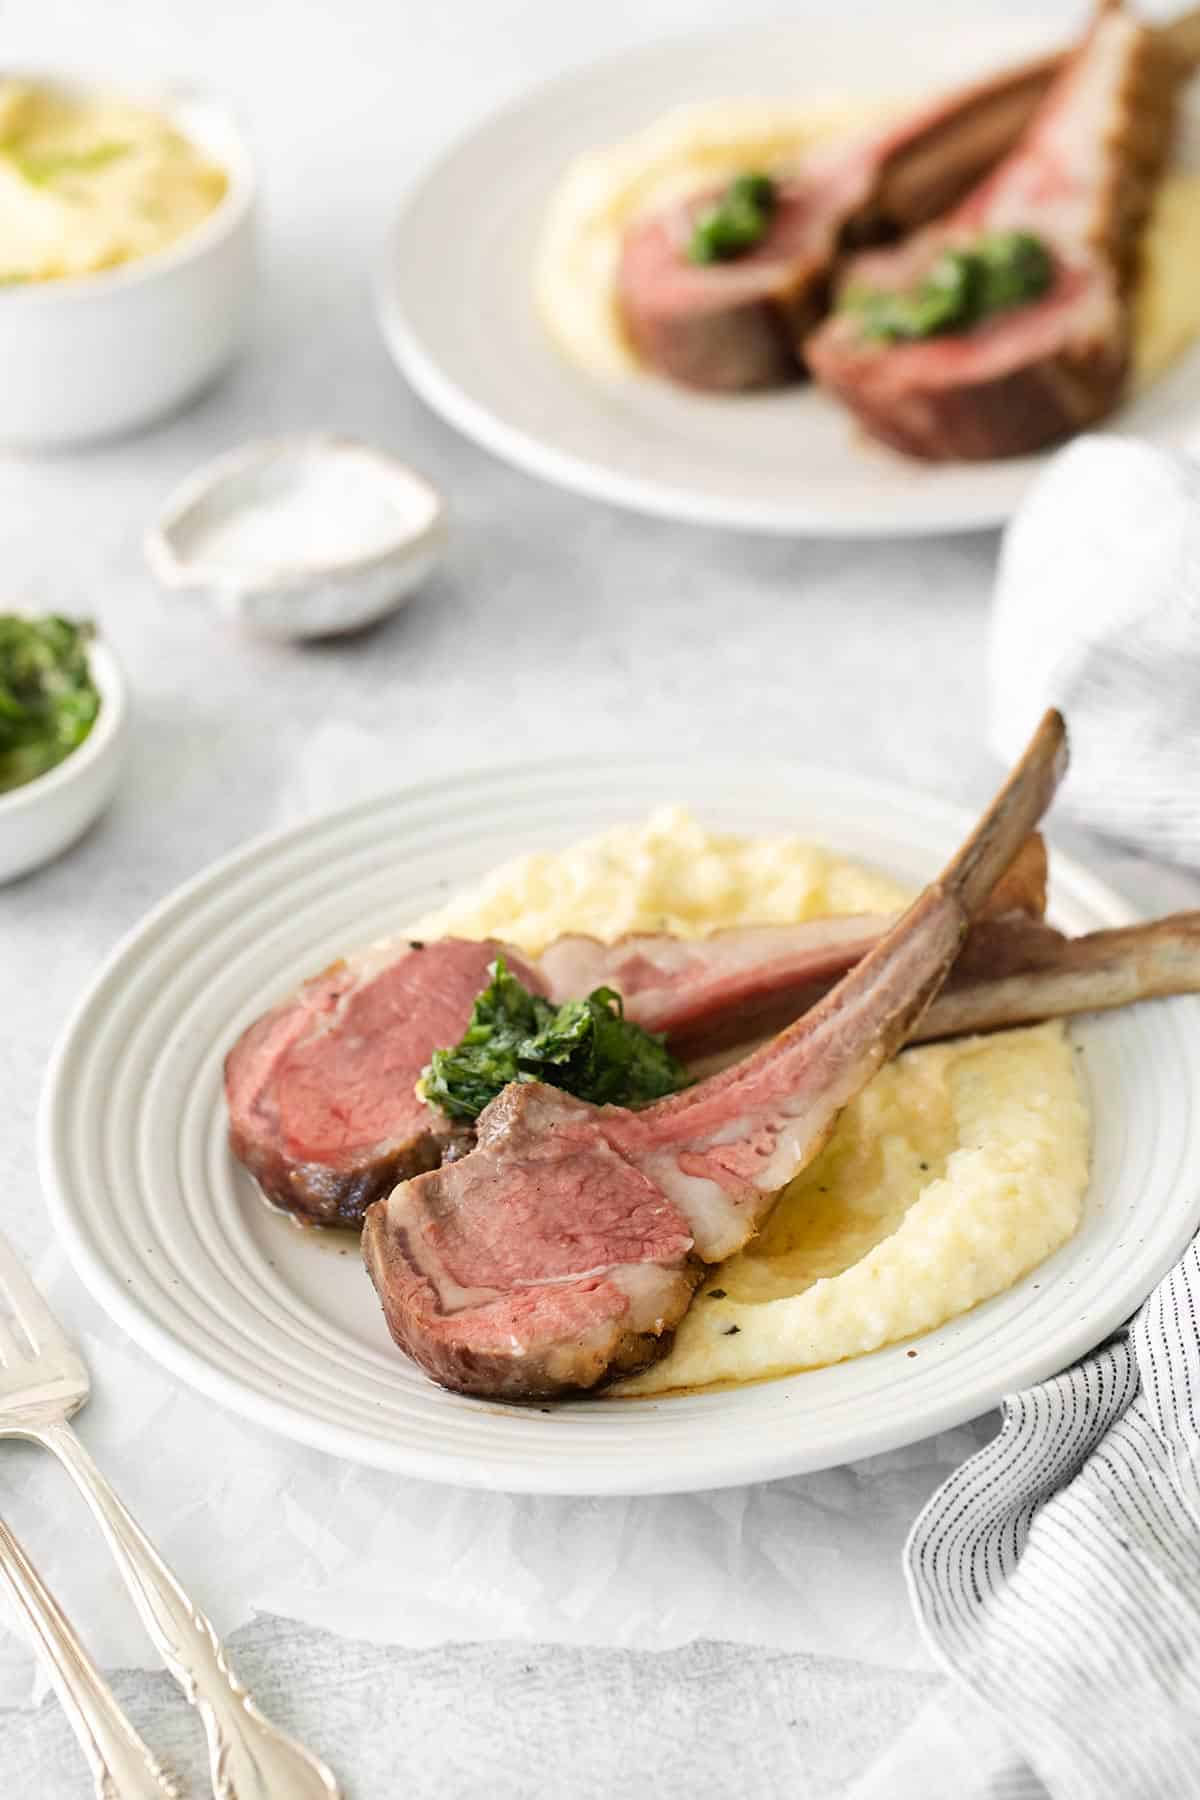 lamb chops on a plate with mashed potatoes.